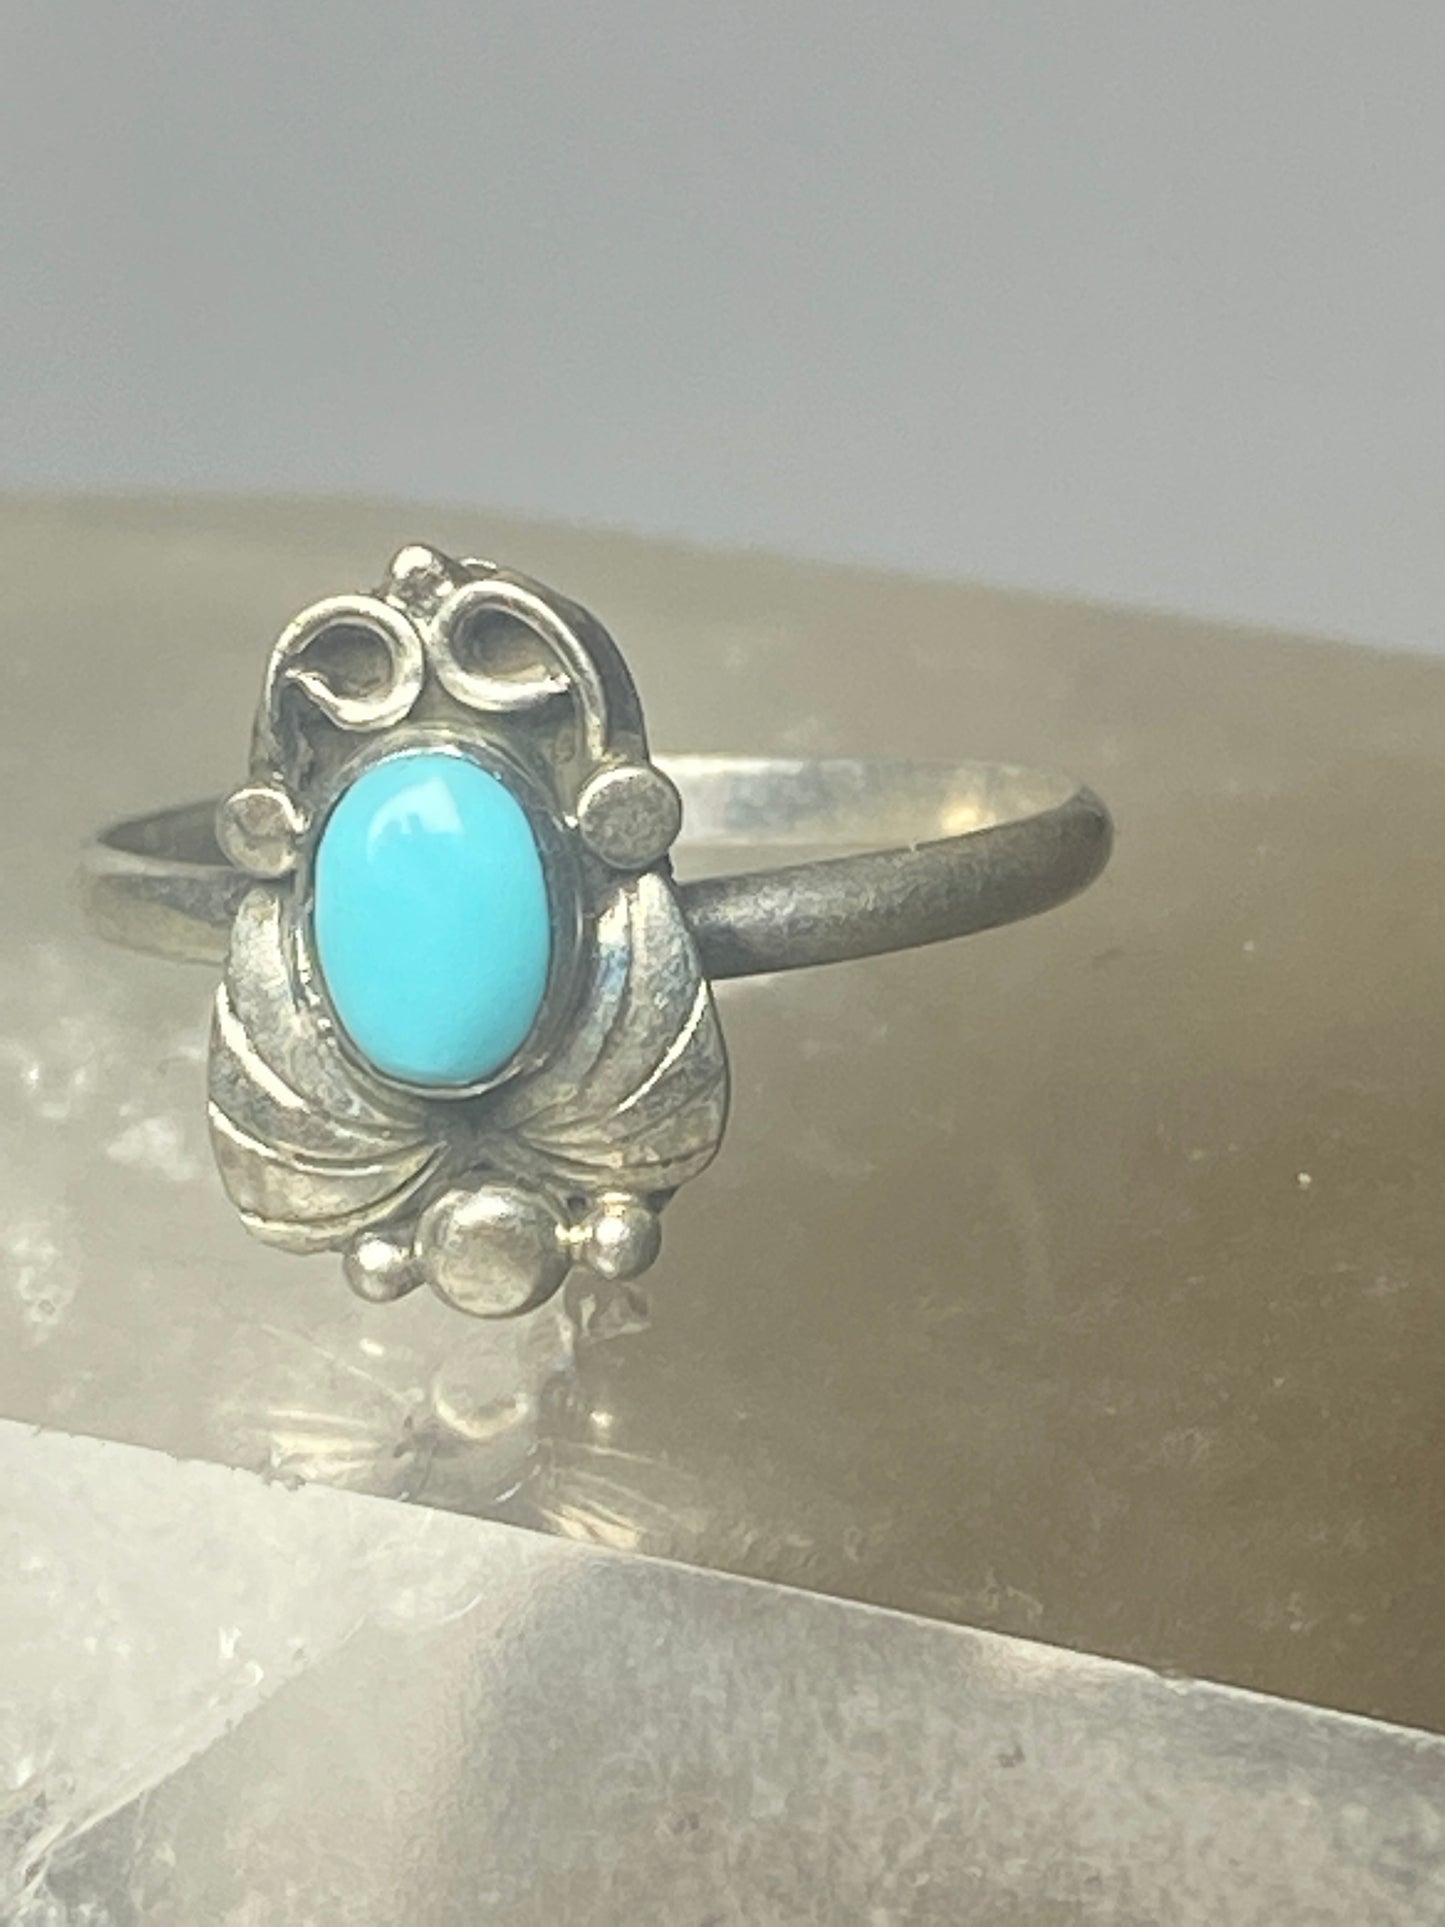 Turquoise ring leaves band southwest sterling silver women girls r